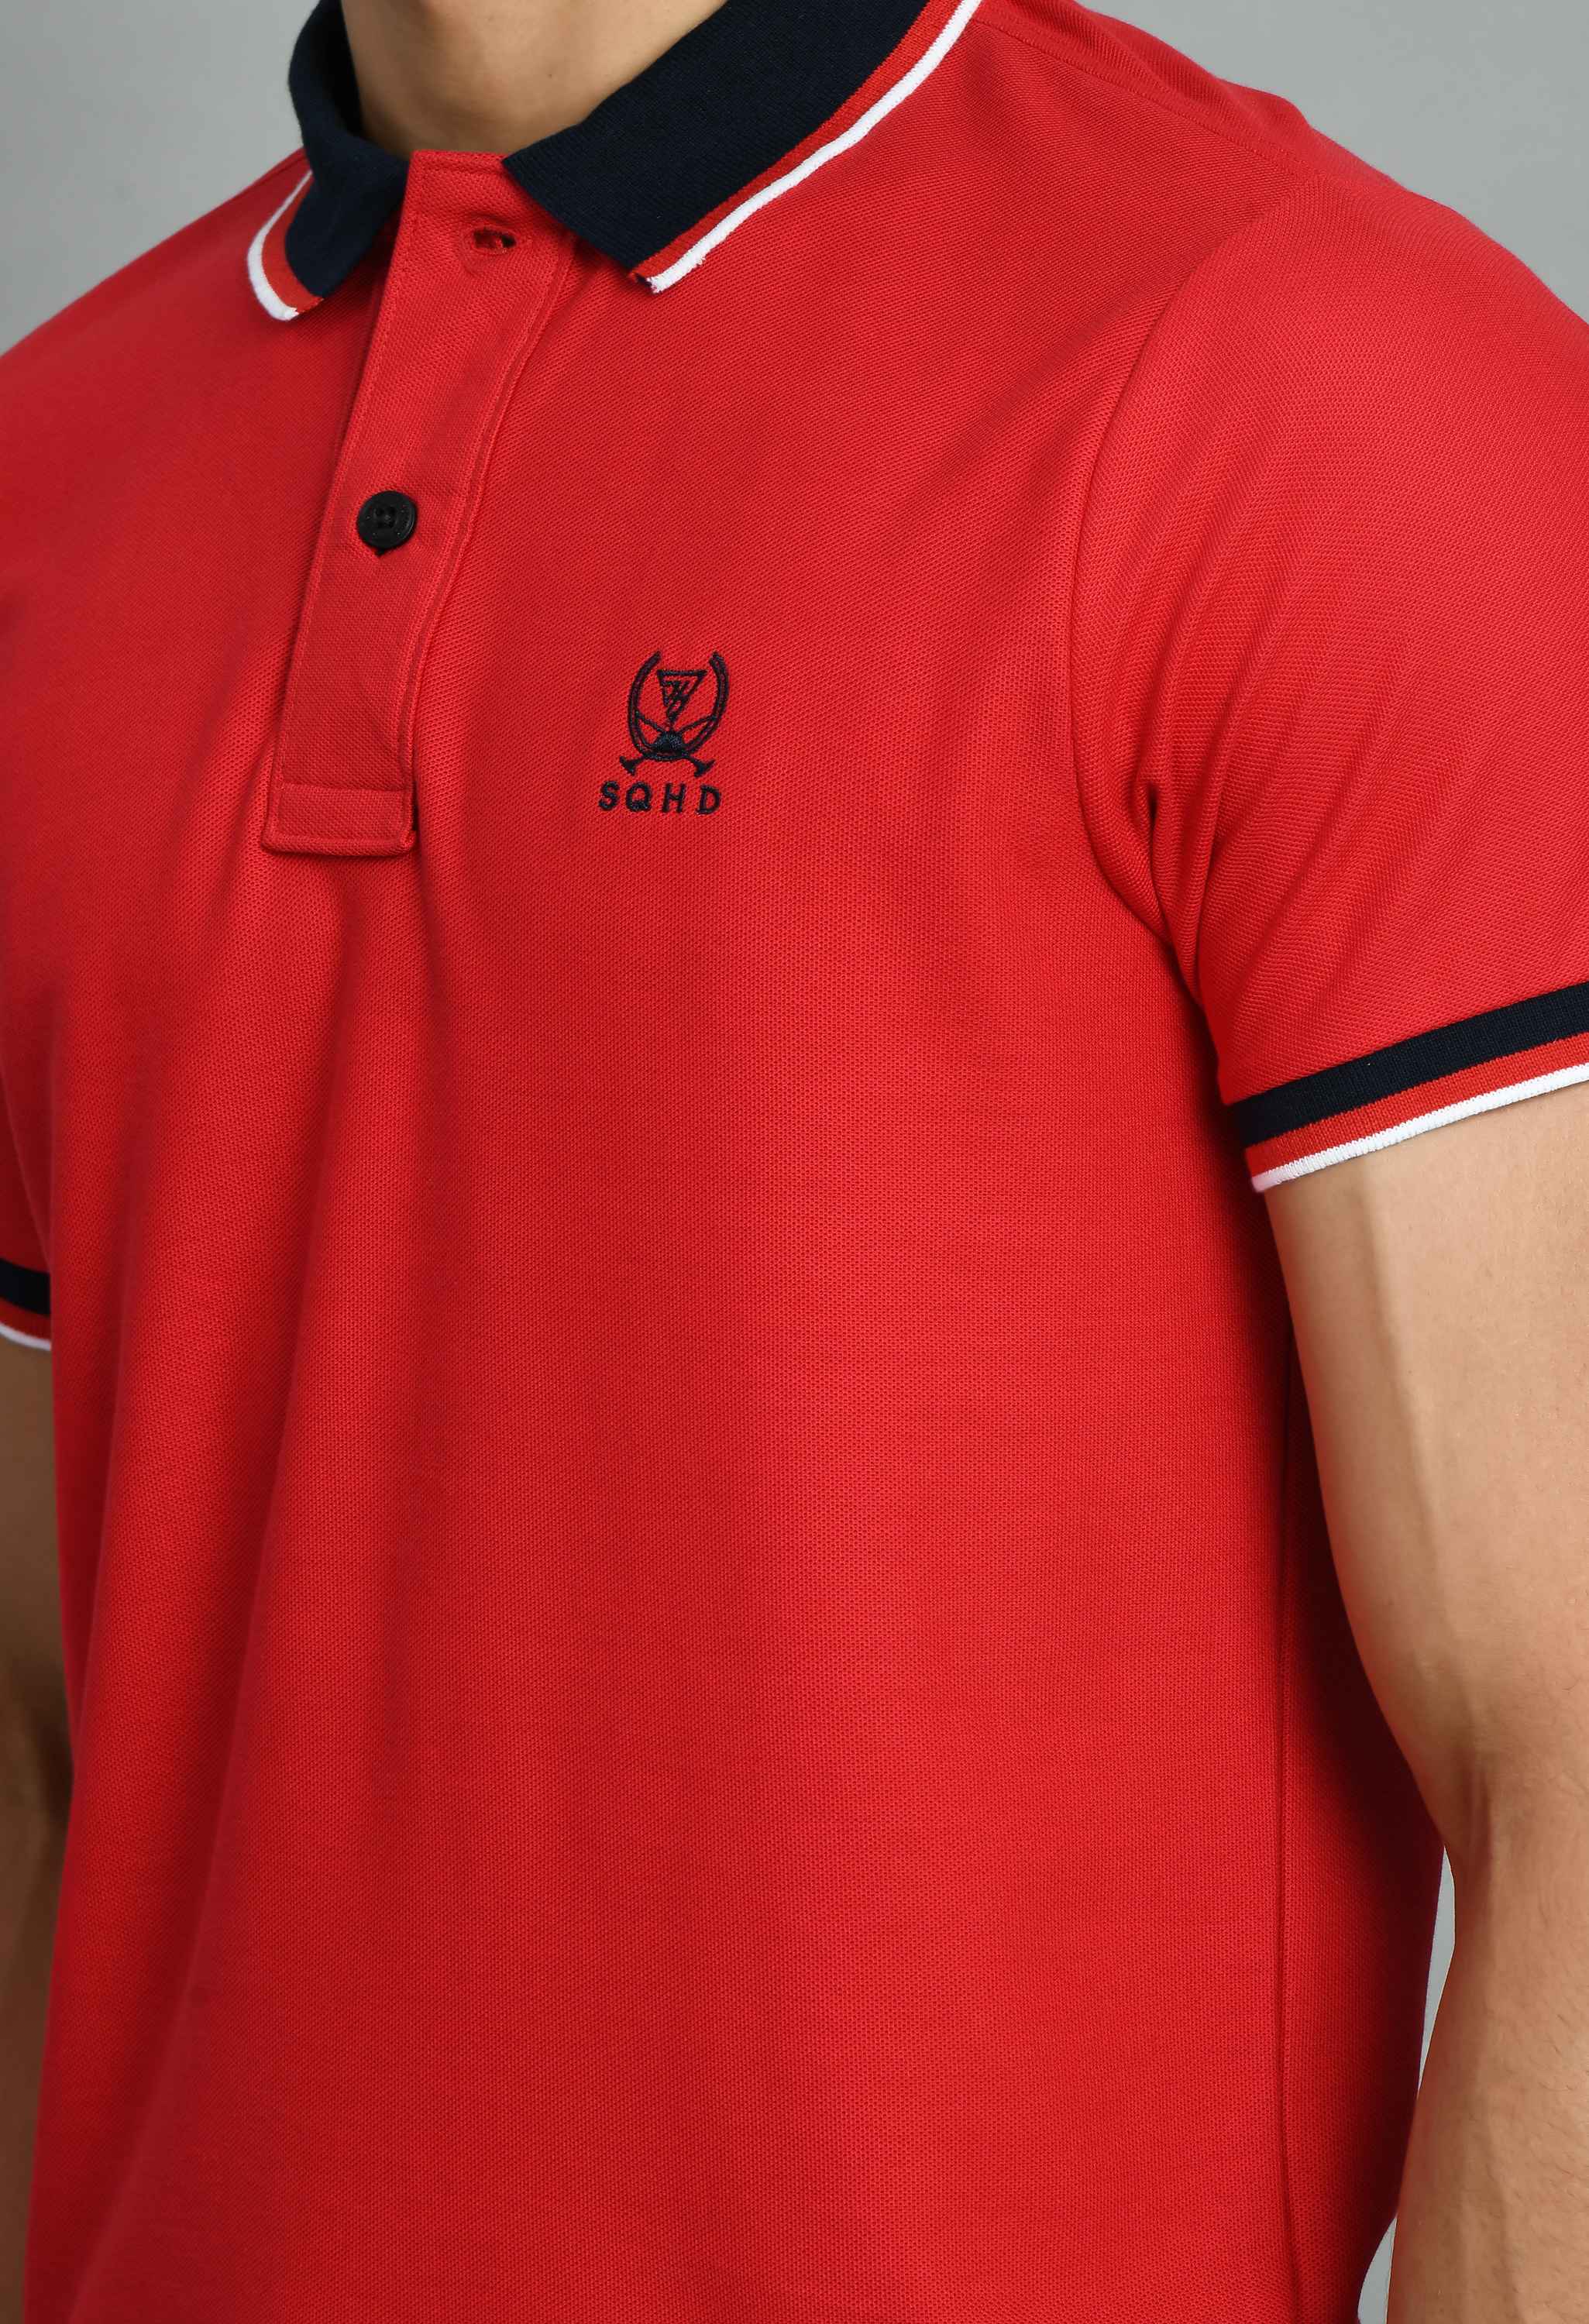 Men's Solid Red Smart Fit Polo T-Shirt